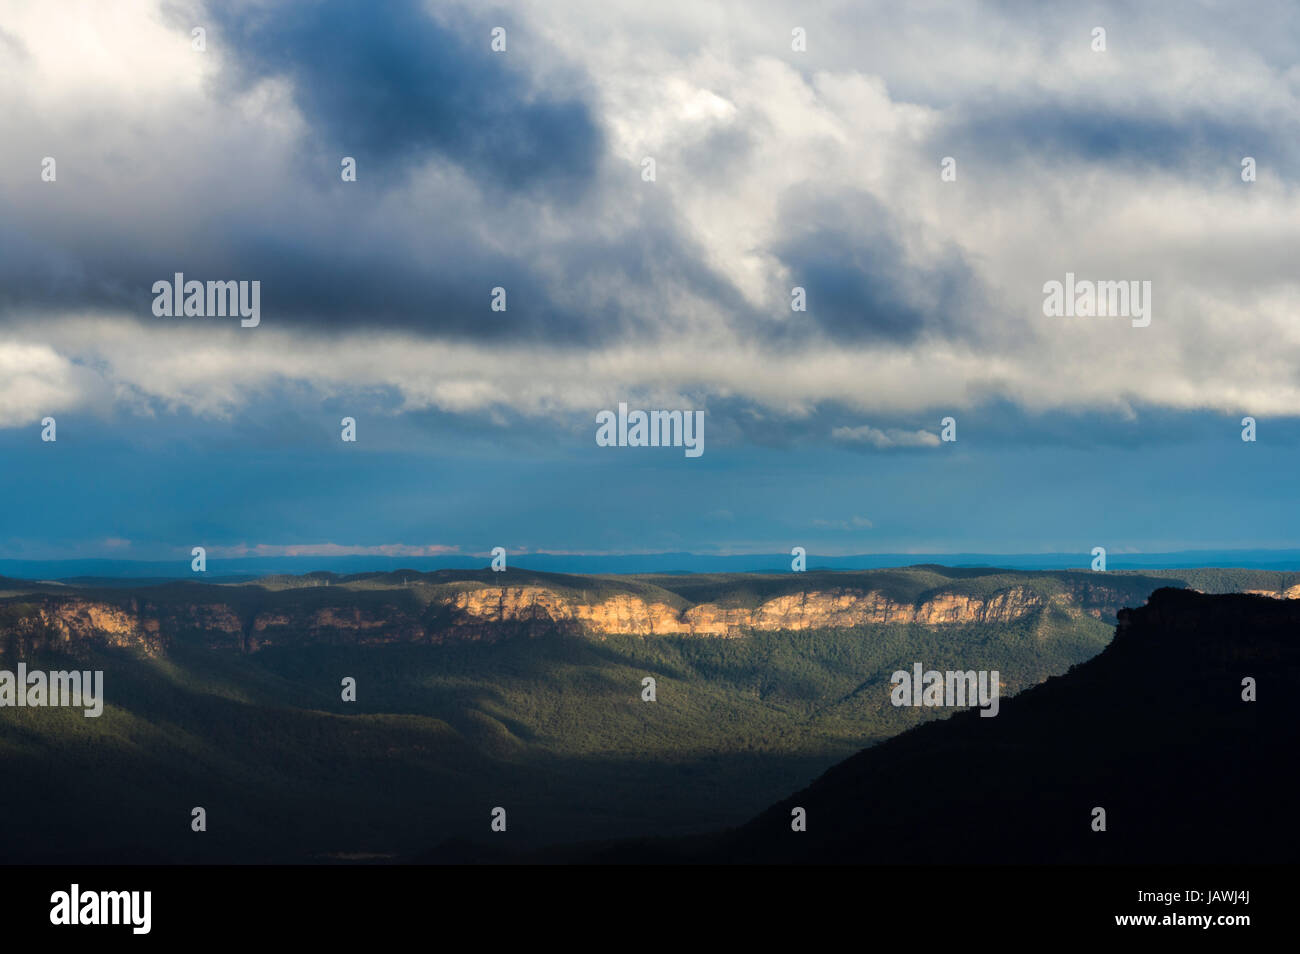 A late afternoon storm descends over a sandstone plateau and eucalyptus forest valley. Stock Photo